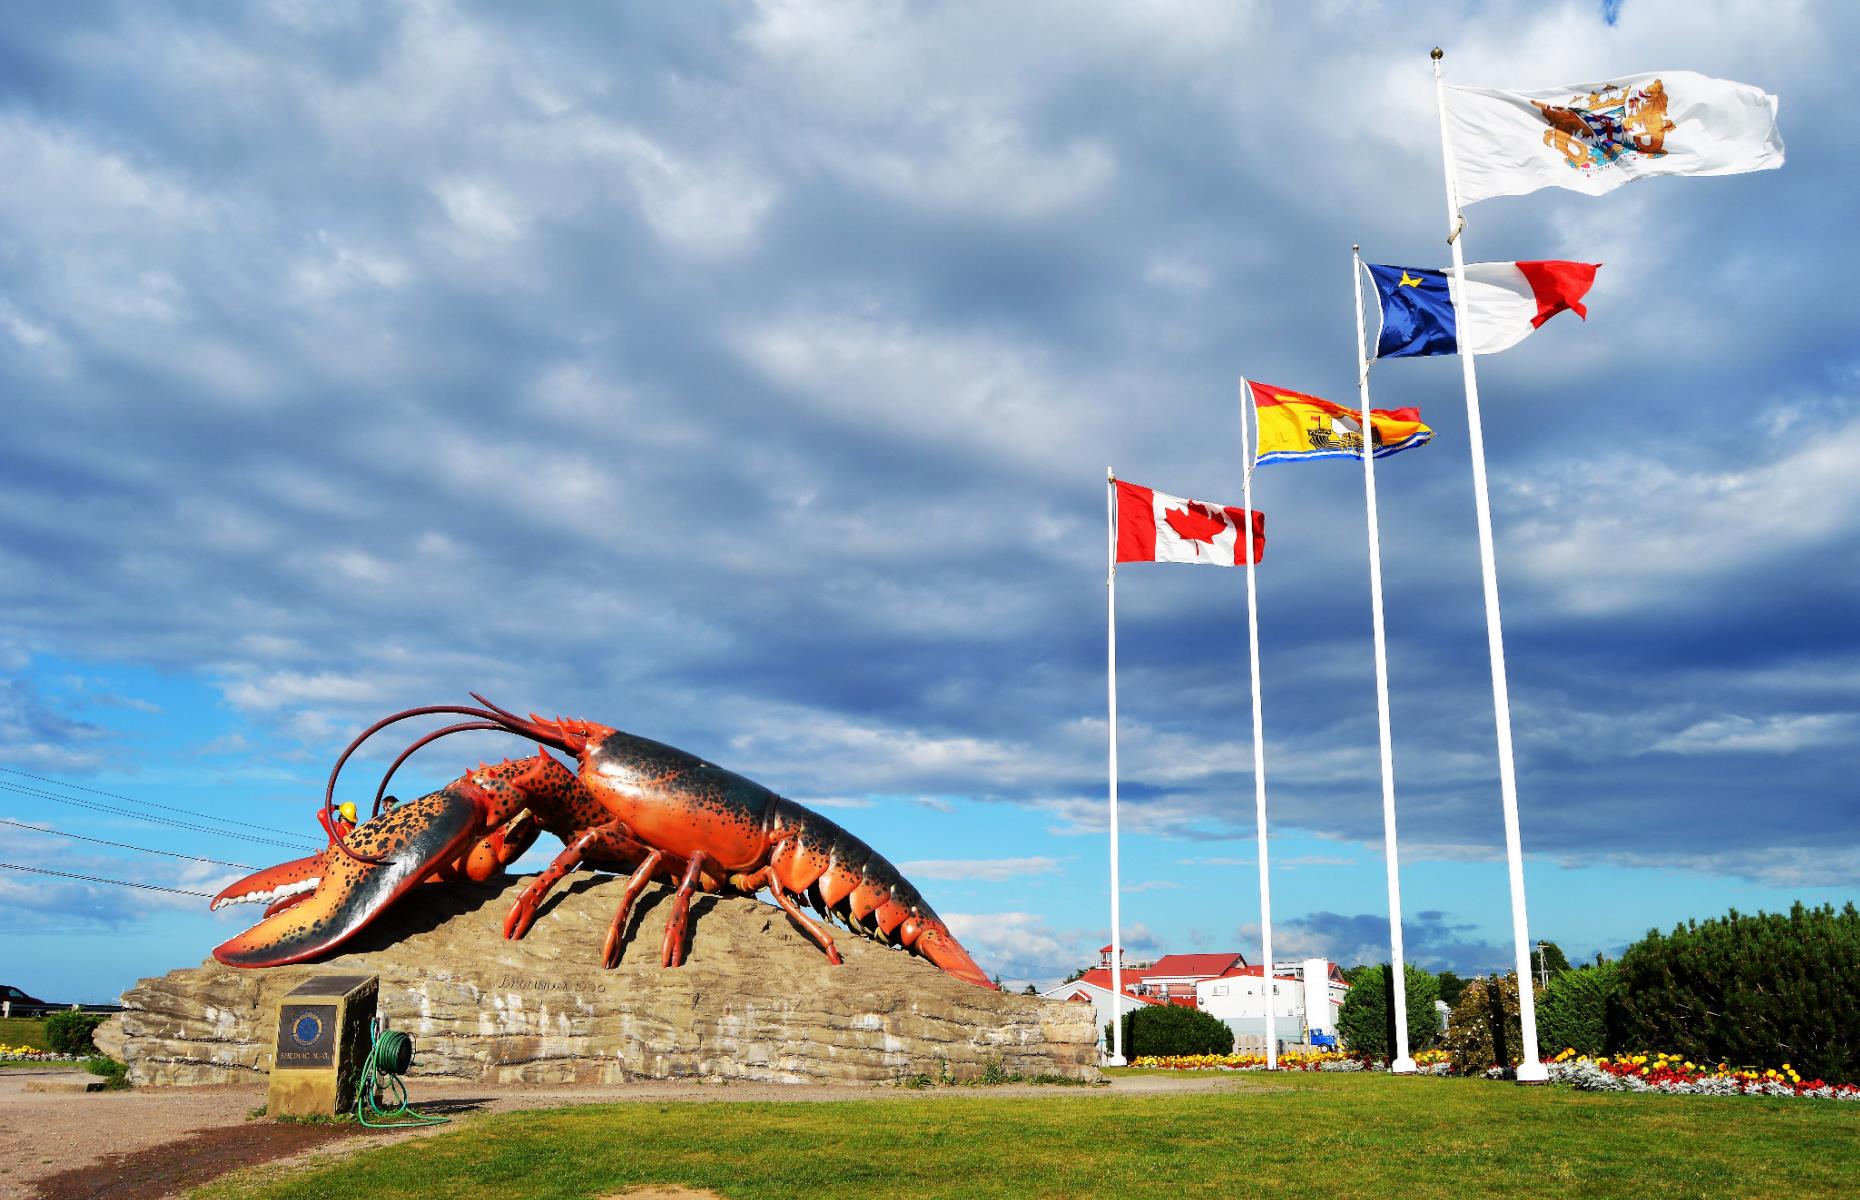 <p>Known to many as the lobster capital of the world and home to a famed giant lobster statue, Shediac is not only a hotbed for lobster fisheries, but is also rich in Acadian culture. The majority of Shediac’s residents are still of Acadian heritage, with their earliest ancestors having arrived in the mid-1700s. In more modern times, the town is particularly popular with vacationers thanks to its famously warm waters and sandy beaches.</p>